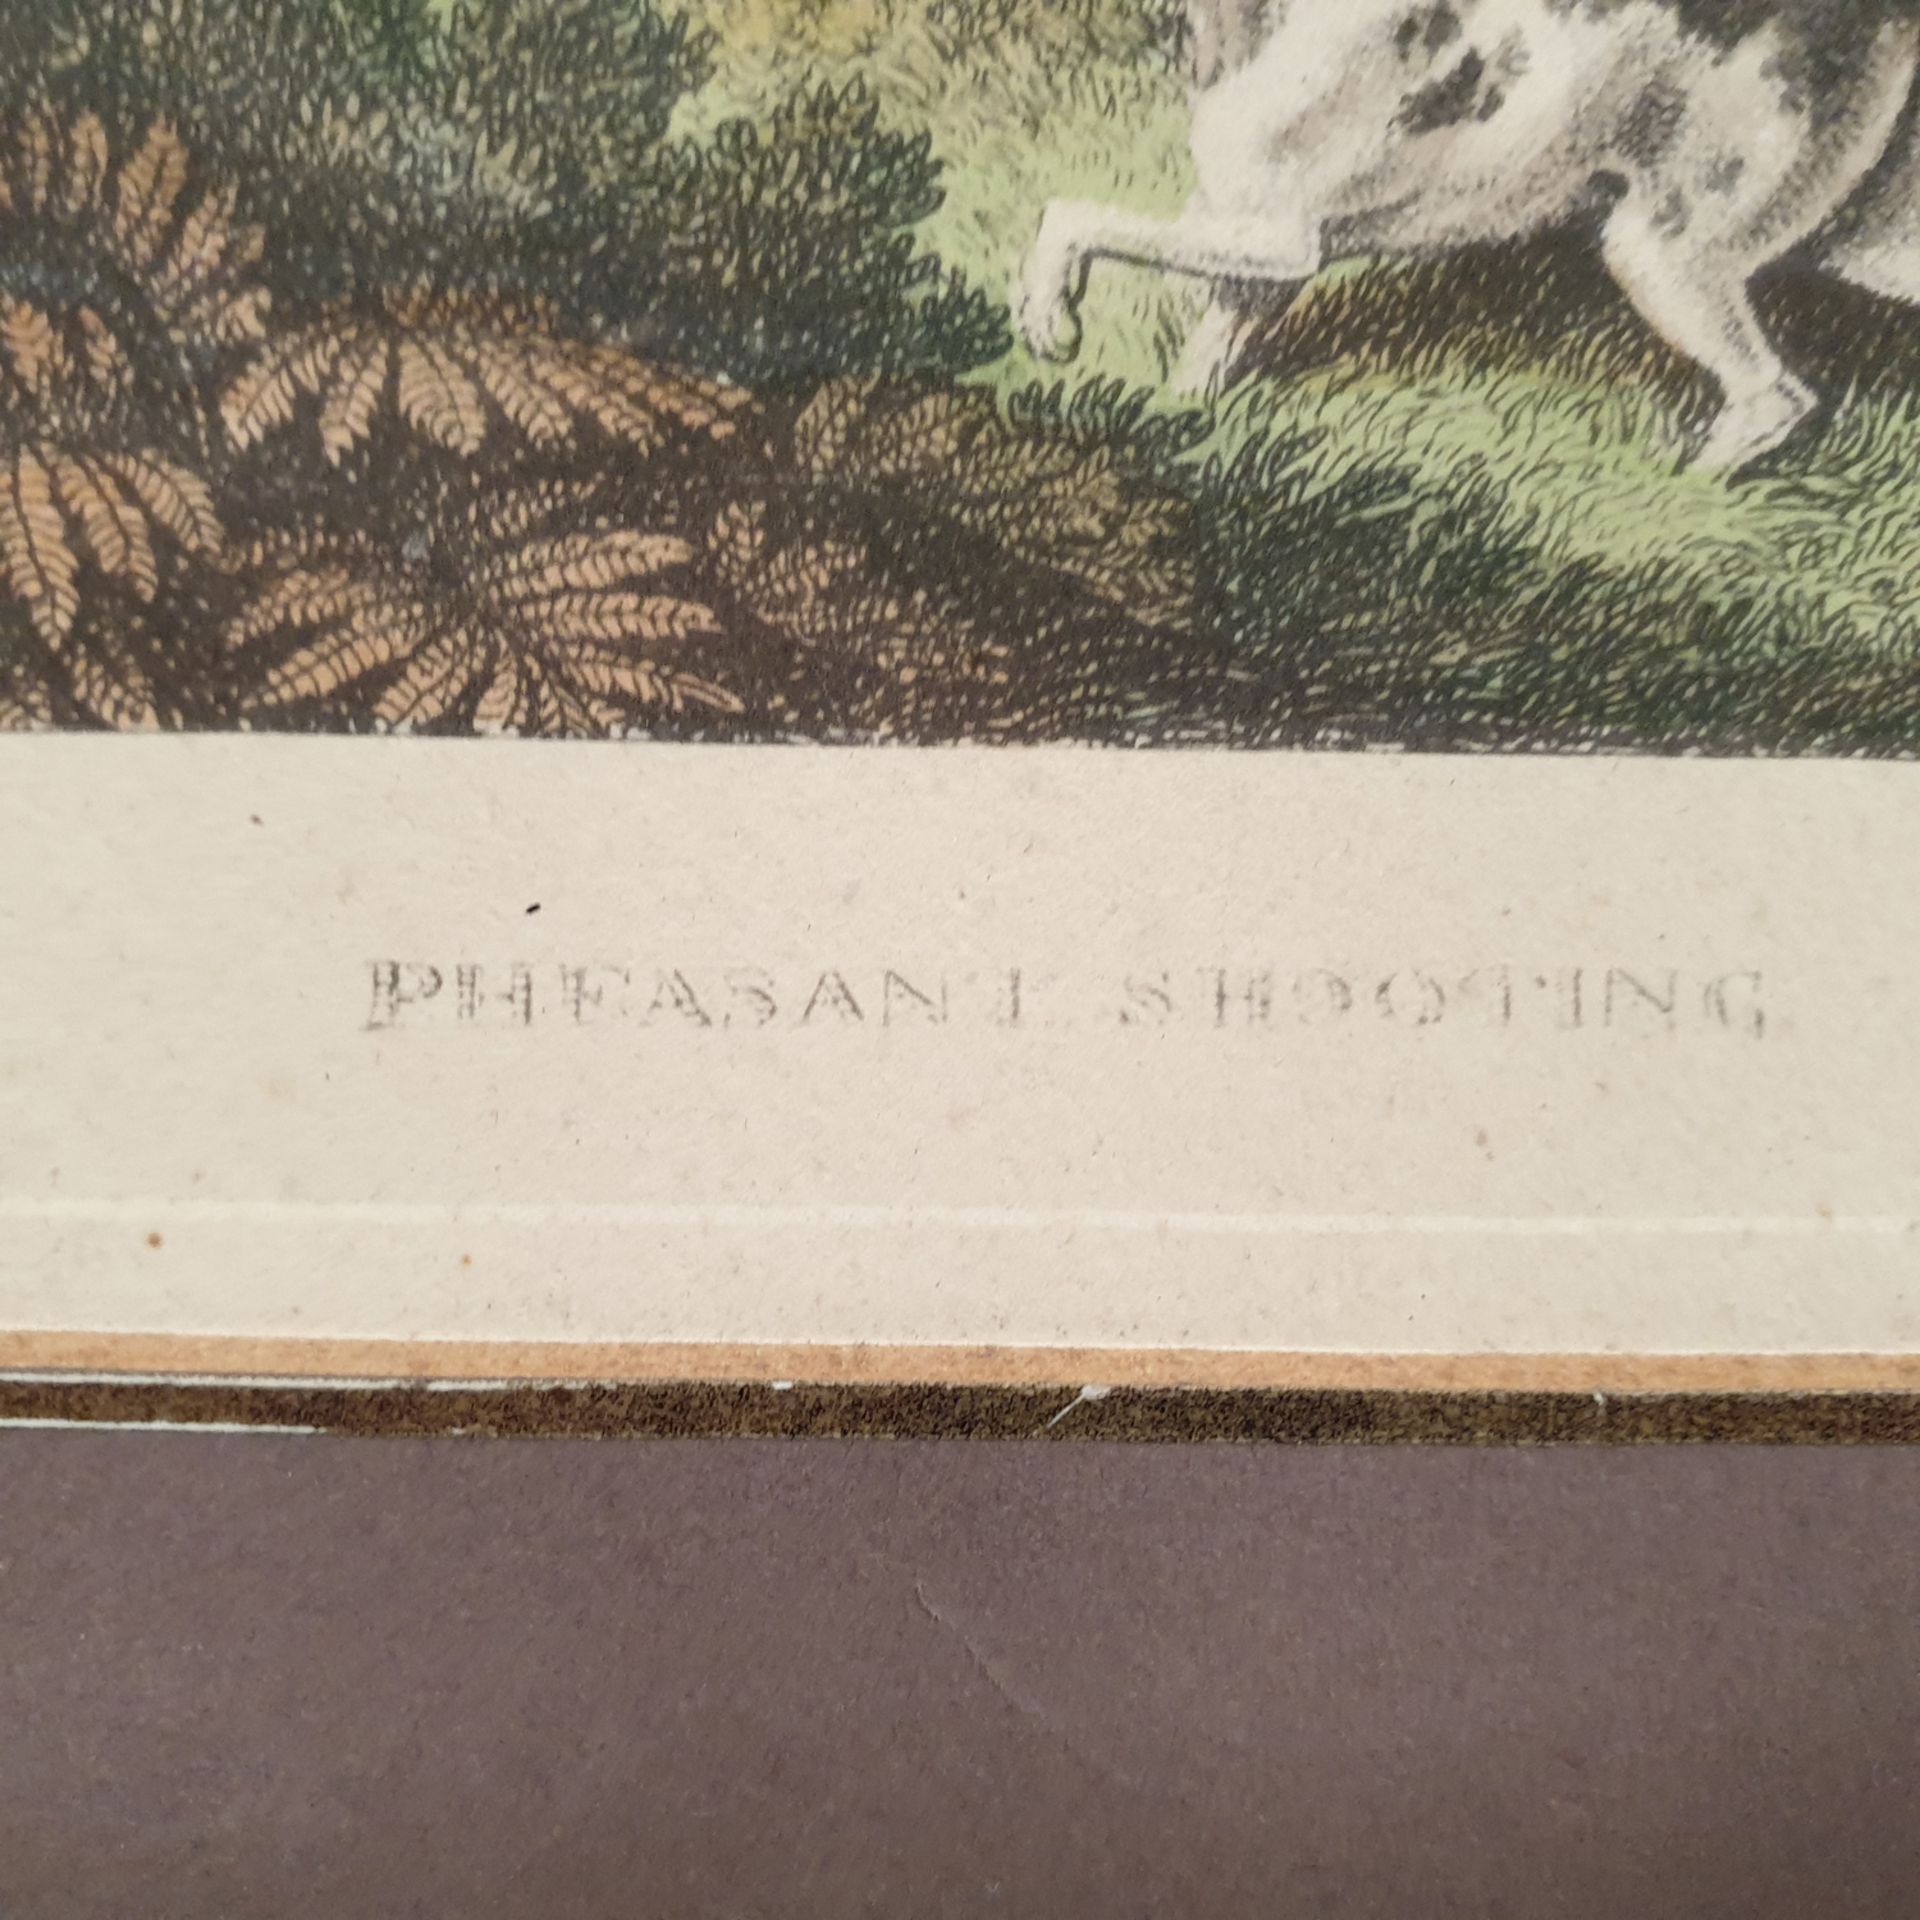 Pheasant Shooting' Framed Picture. Published May 12 1900. Approx Dimensions 17" x 15 1/2". - Image 4 of 5